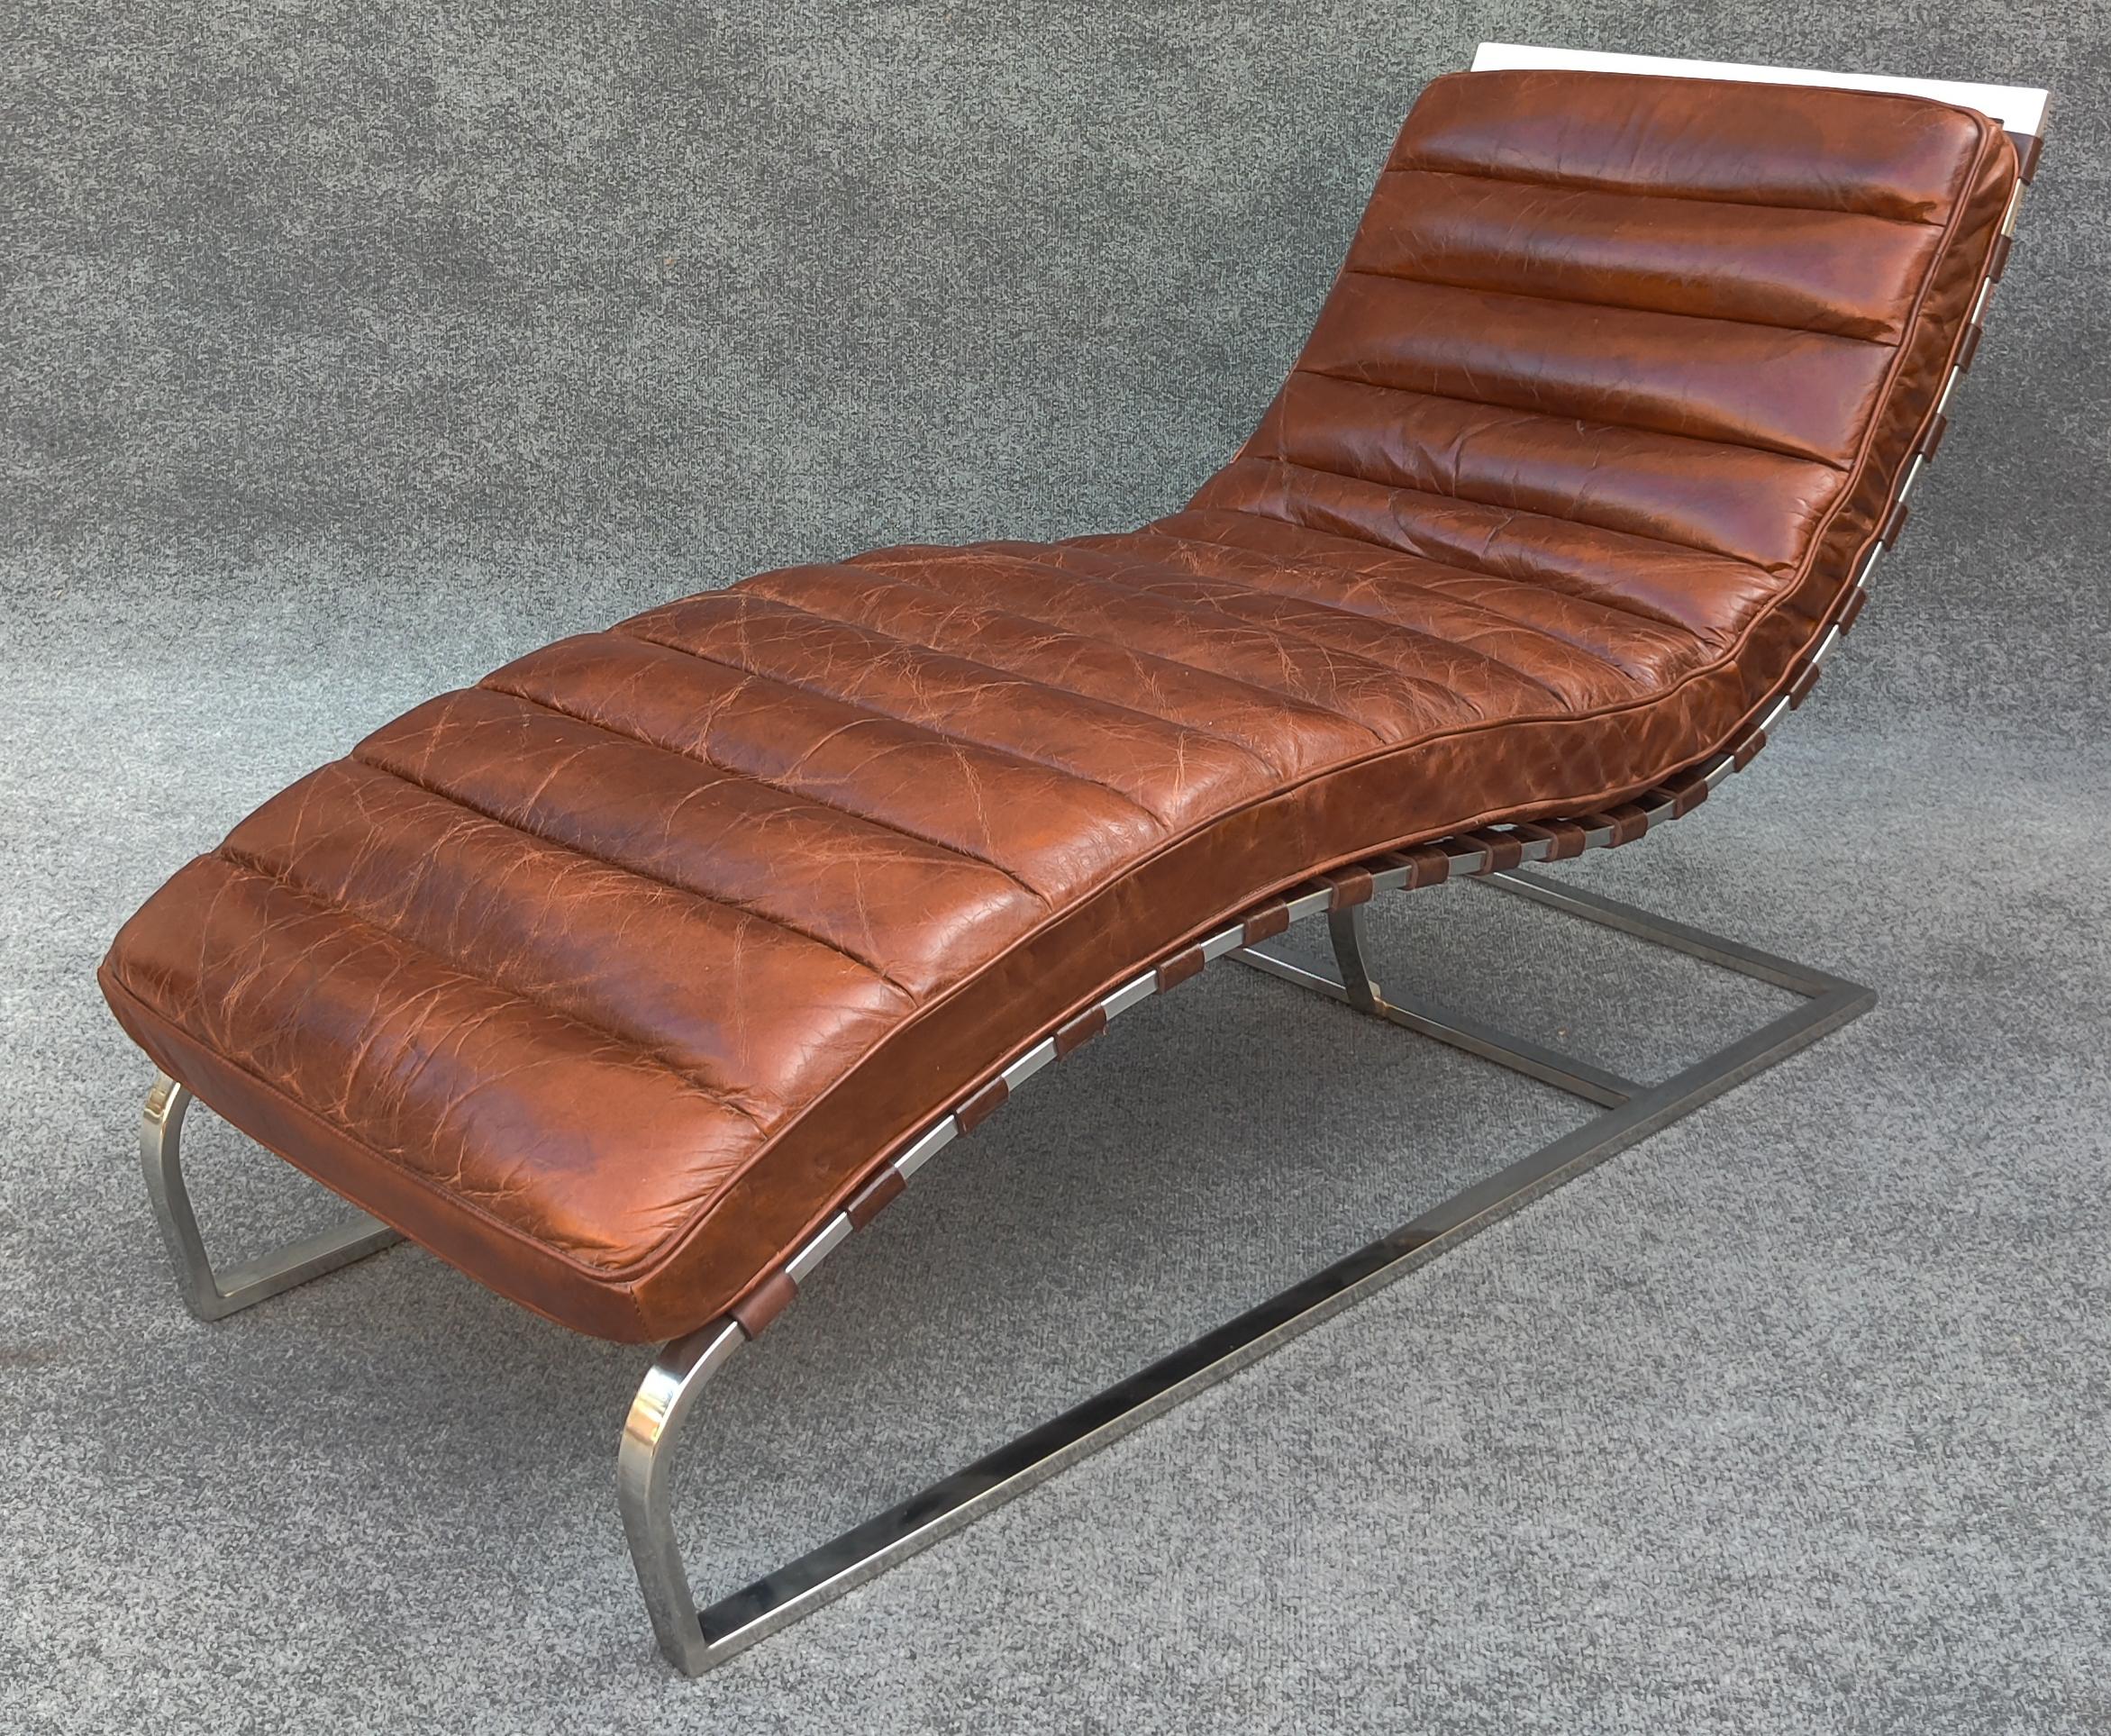 Inspired by a classic 1960s midcentury silhouette, this chair's graceful curves hug the body for optimal comfort. Constructed with heavy chromed steel and quality stitched leather, this chaise is sturdy, comfortable, and quite attractive. In an